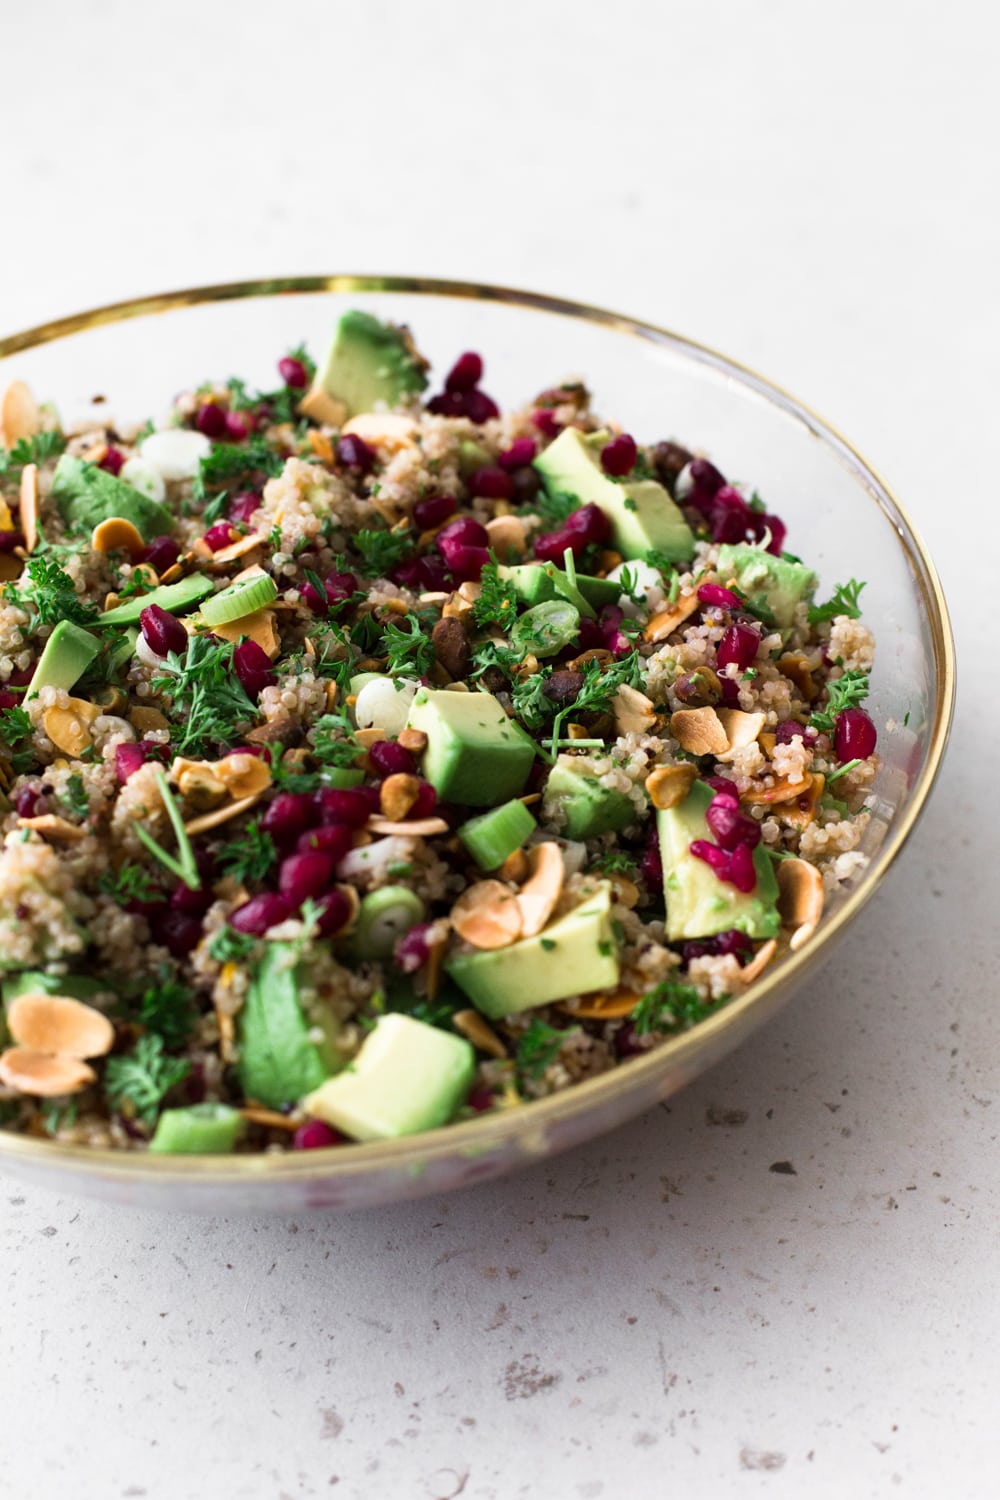 A delicious Vegan Quinoa Crunch Salad studded with toasted Almond, Pistachio and Pomegranate. Perfect for a healthy lunch or as a potluck dish! #quinoa #christmas #holidays #pomegranate #orange #healthy #glutenfree #salad #avocado #pistachio #almond 